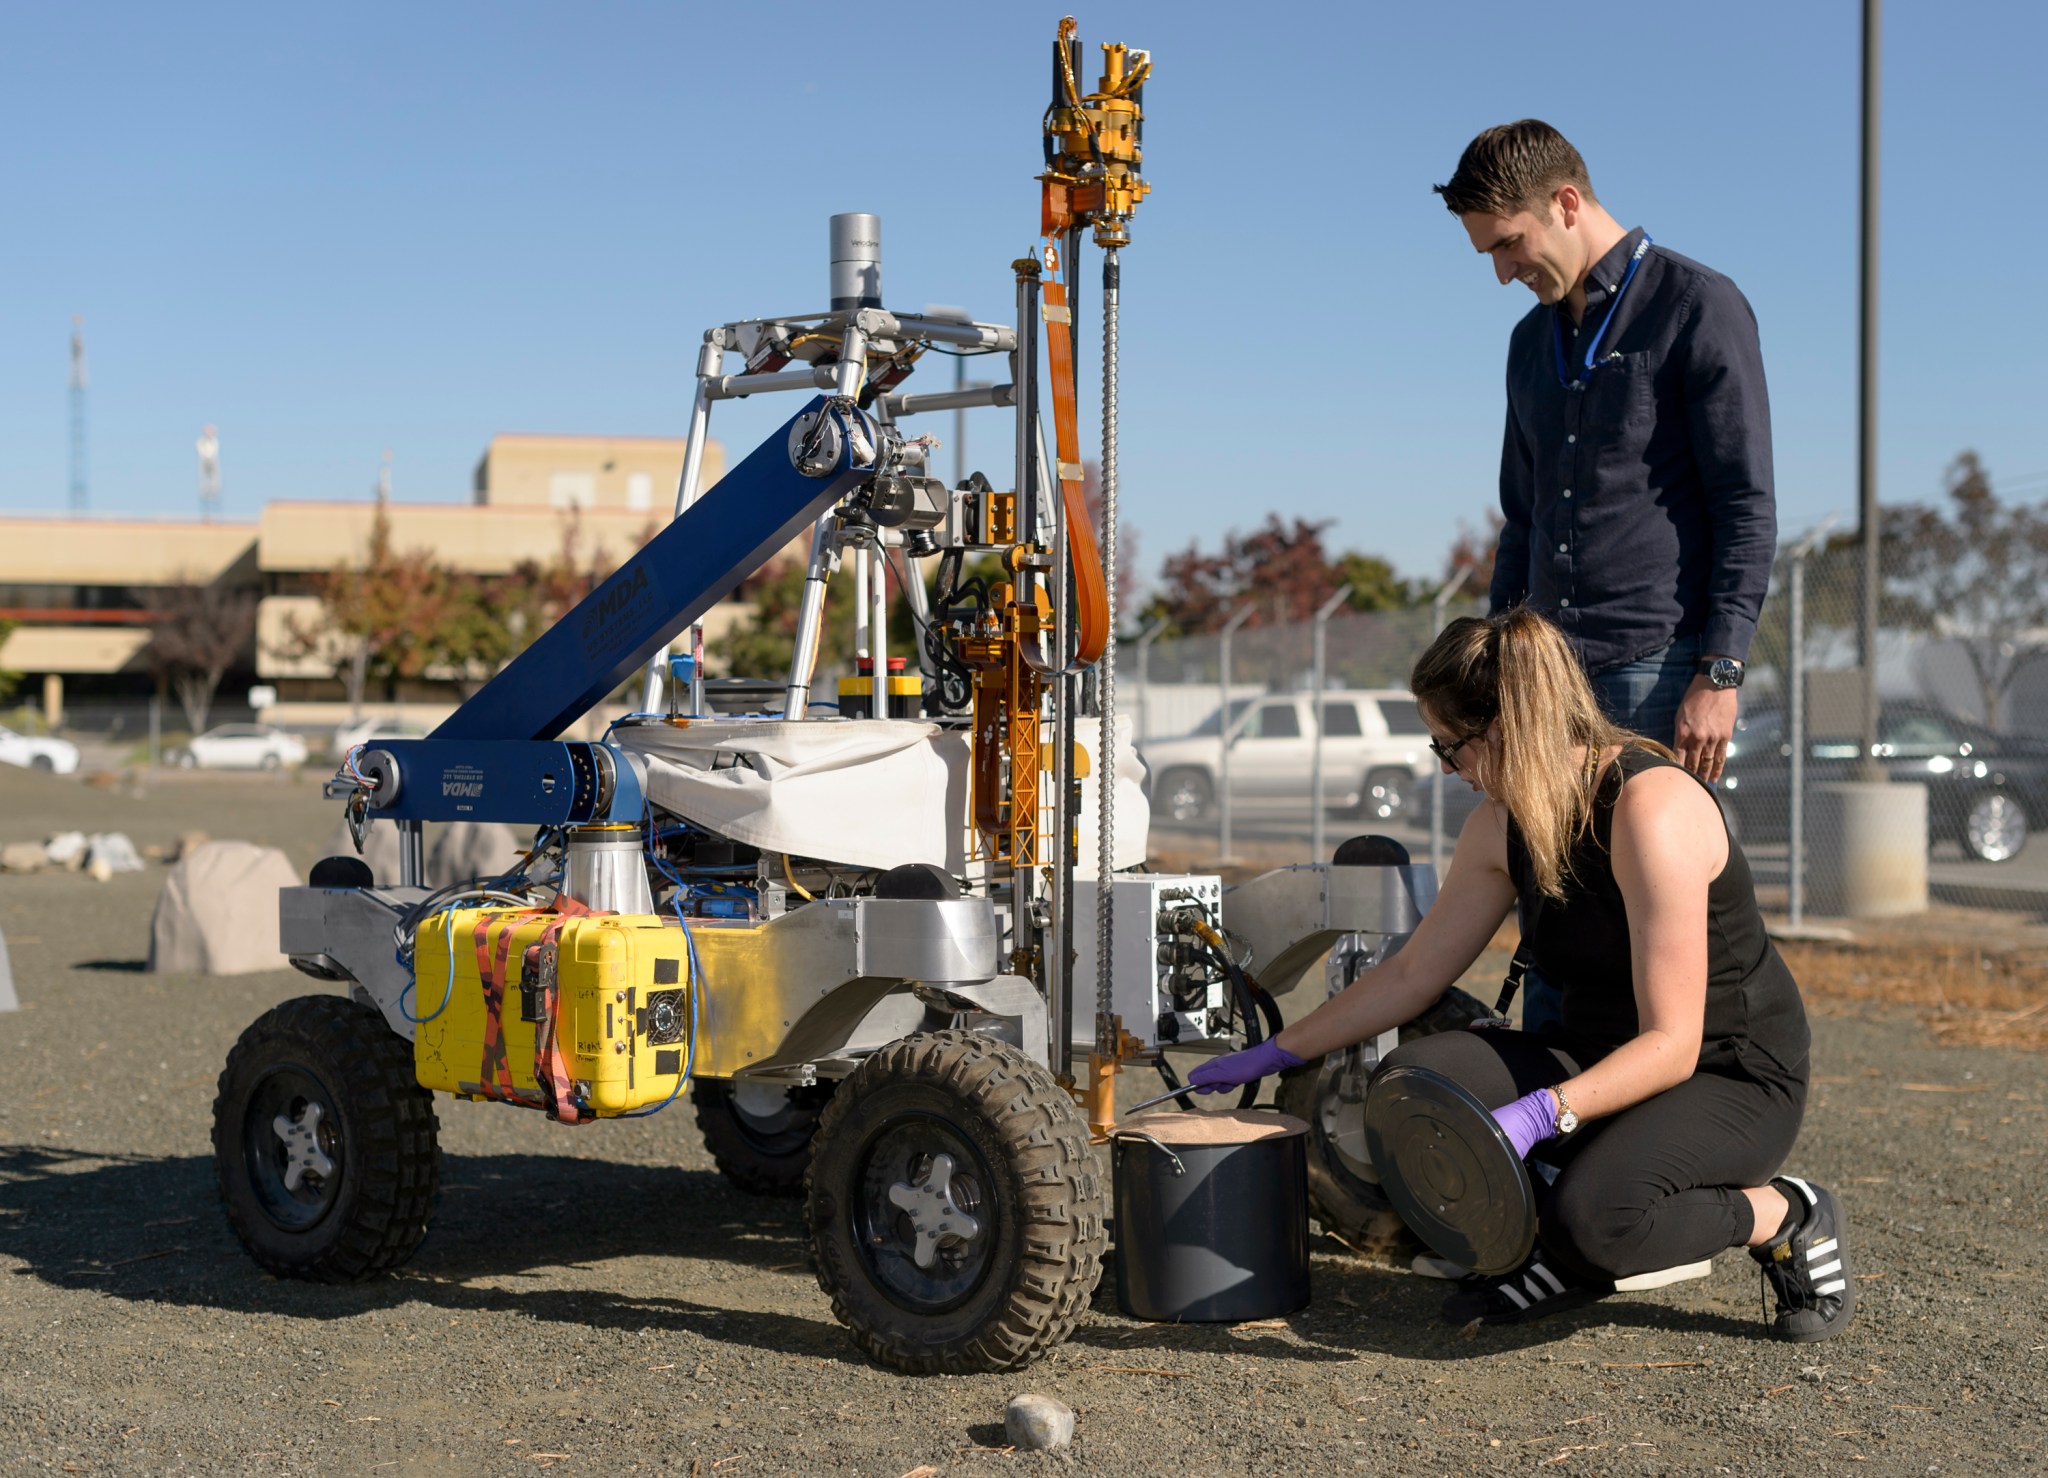 ARADS team members Dean Bergman and Mary Beth Wilhelm prepare to test the drill installed on the K-REX2 rover.